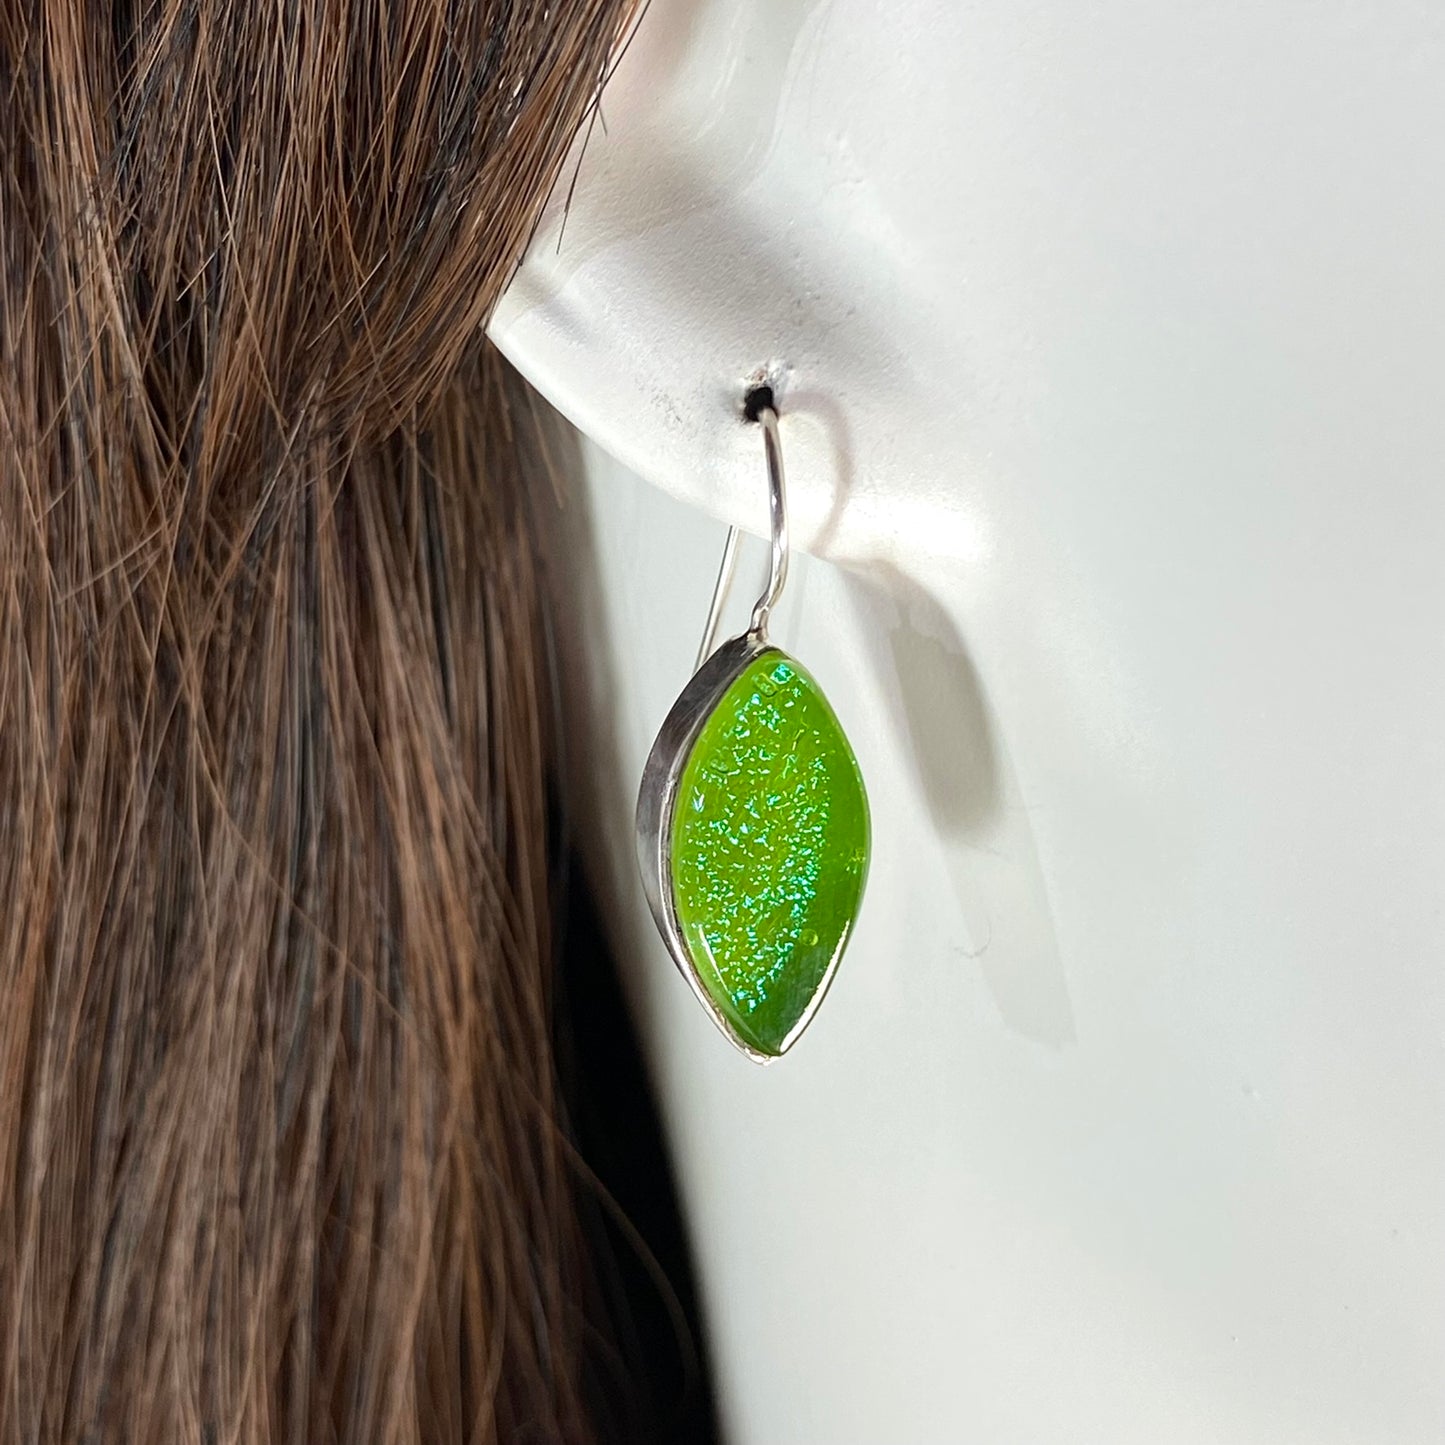 Marquise Earrings in Citron